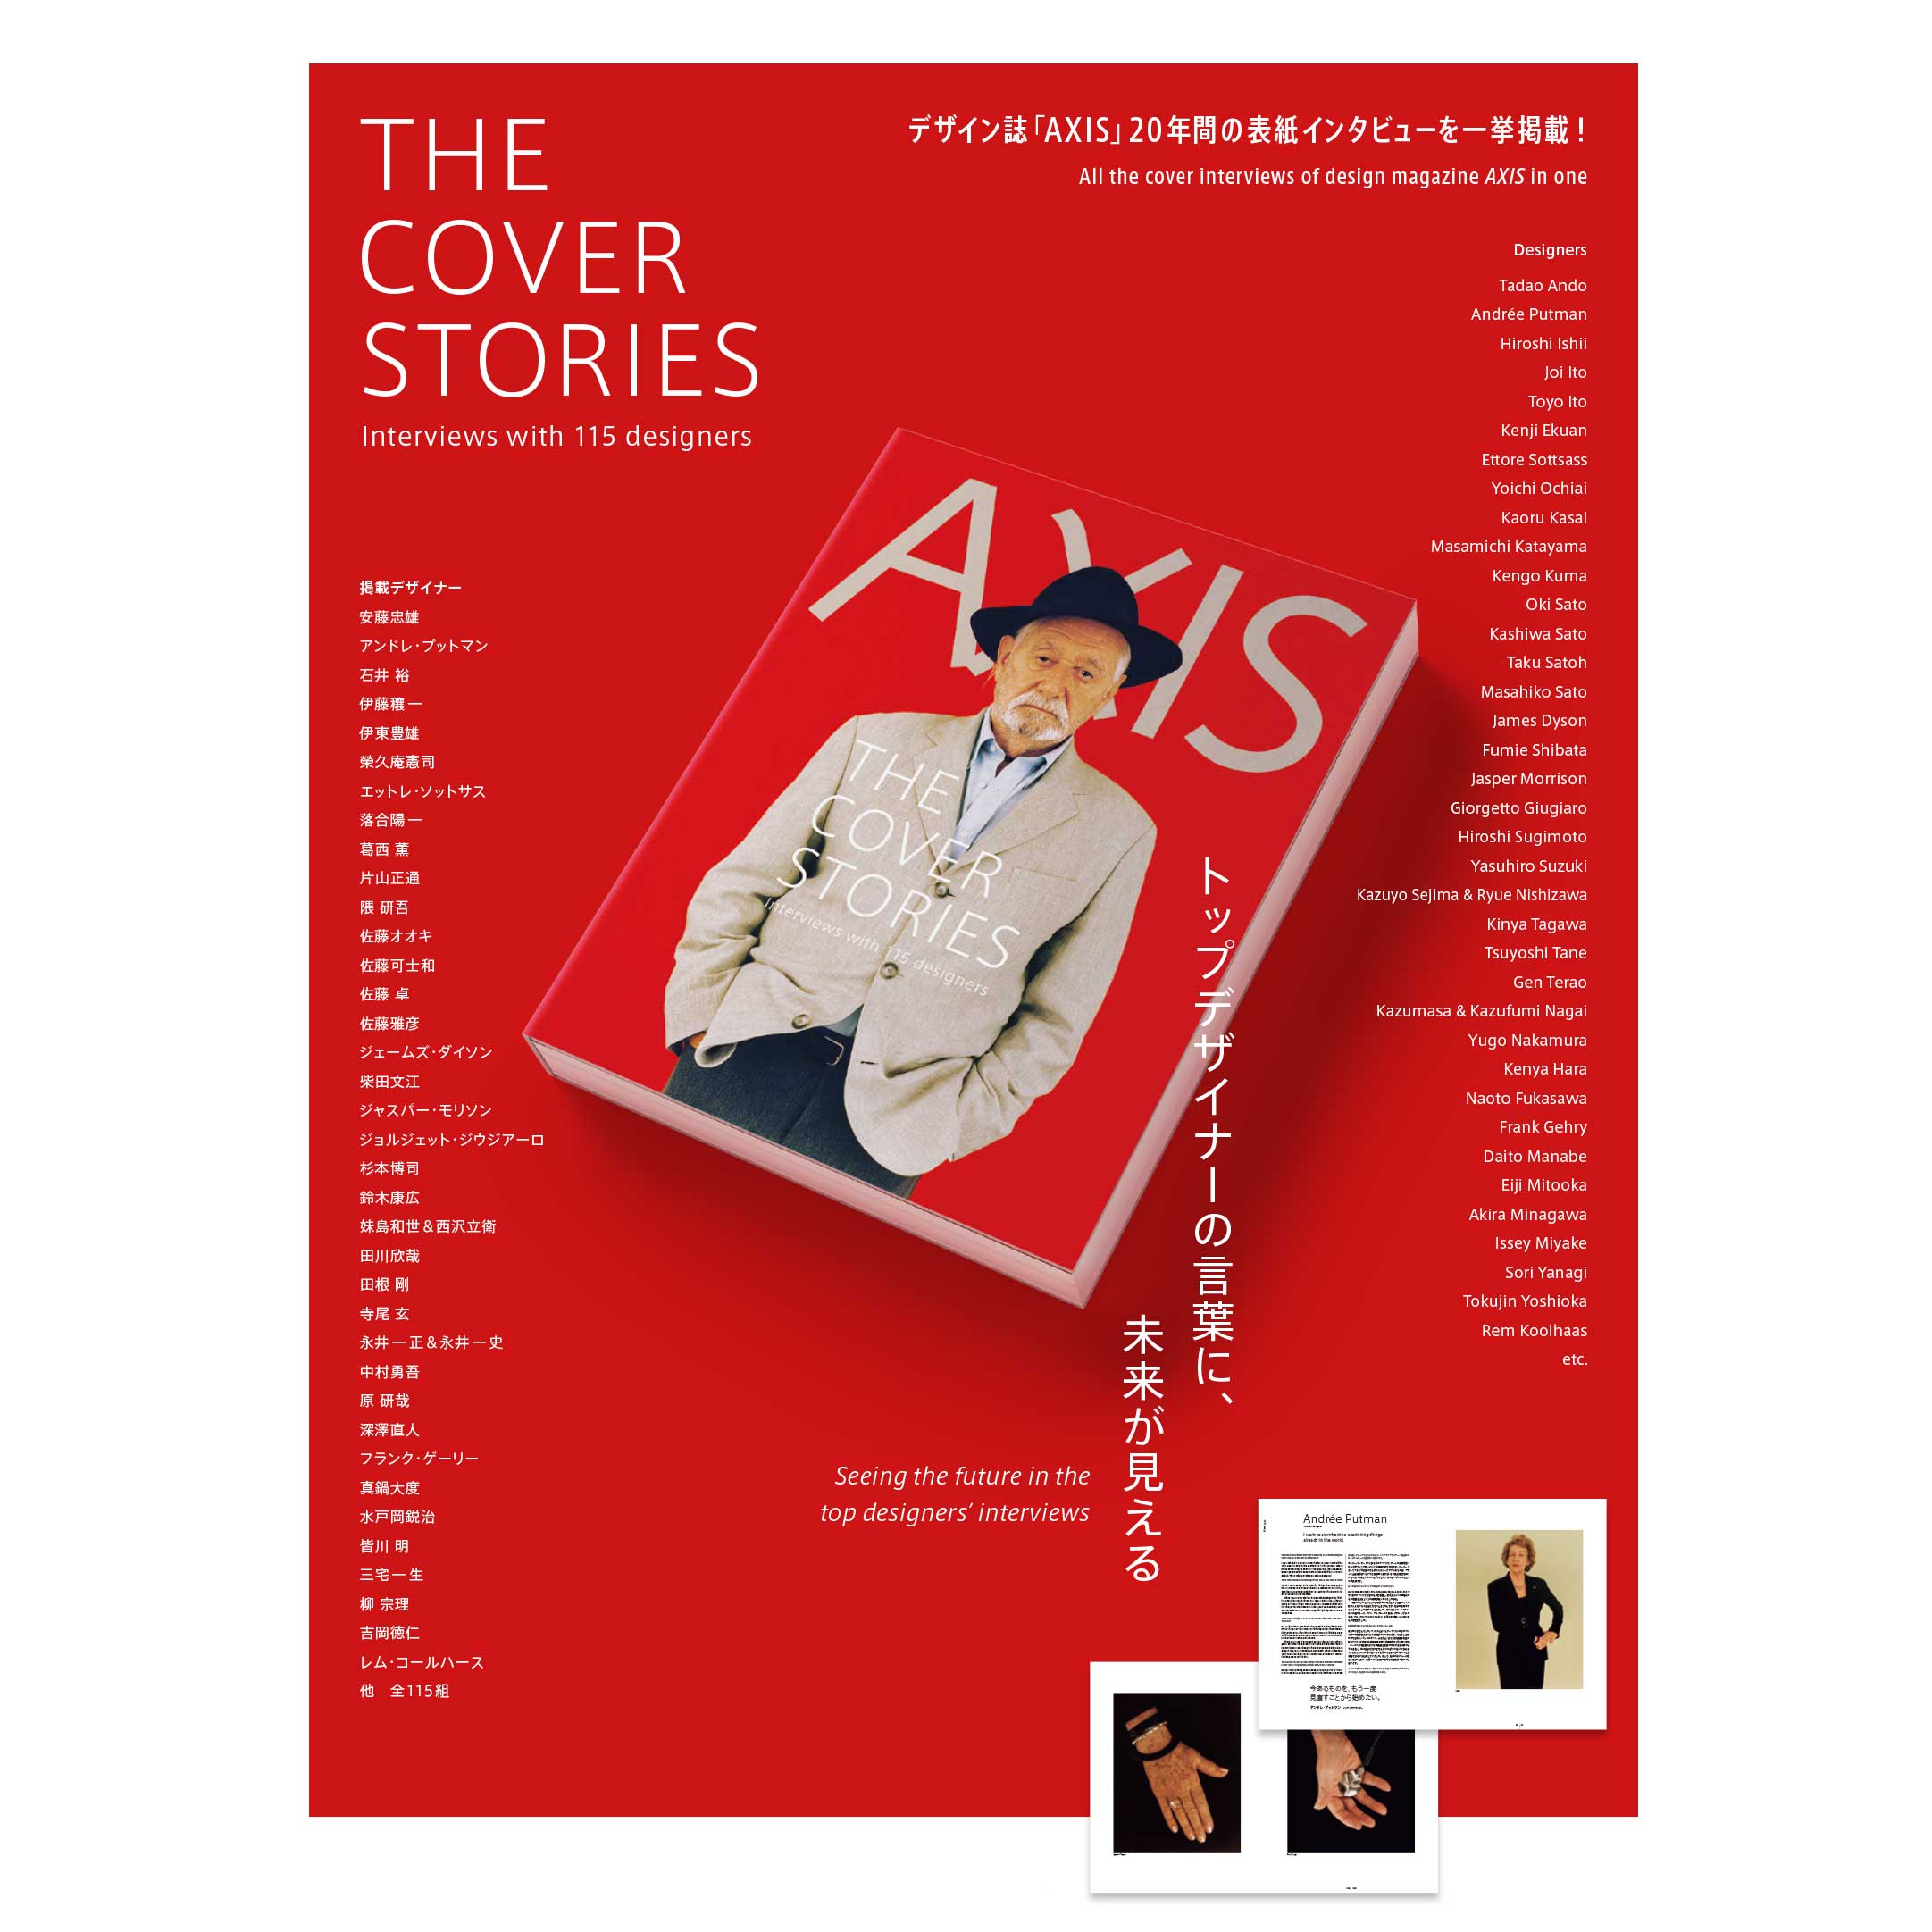 AXIS THE COVER STORIES Interviews with 115 designers